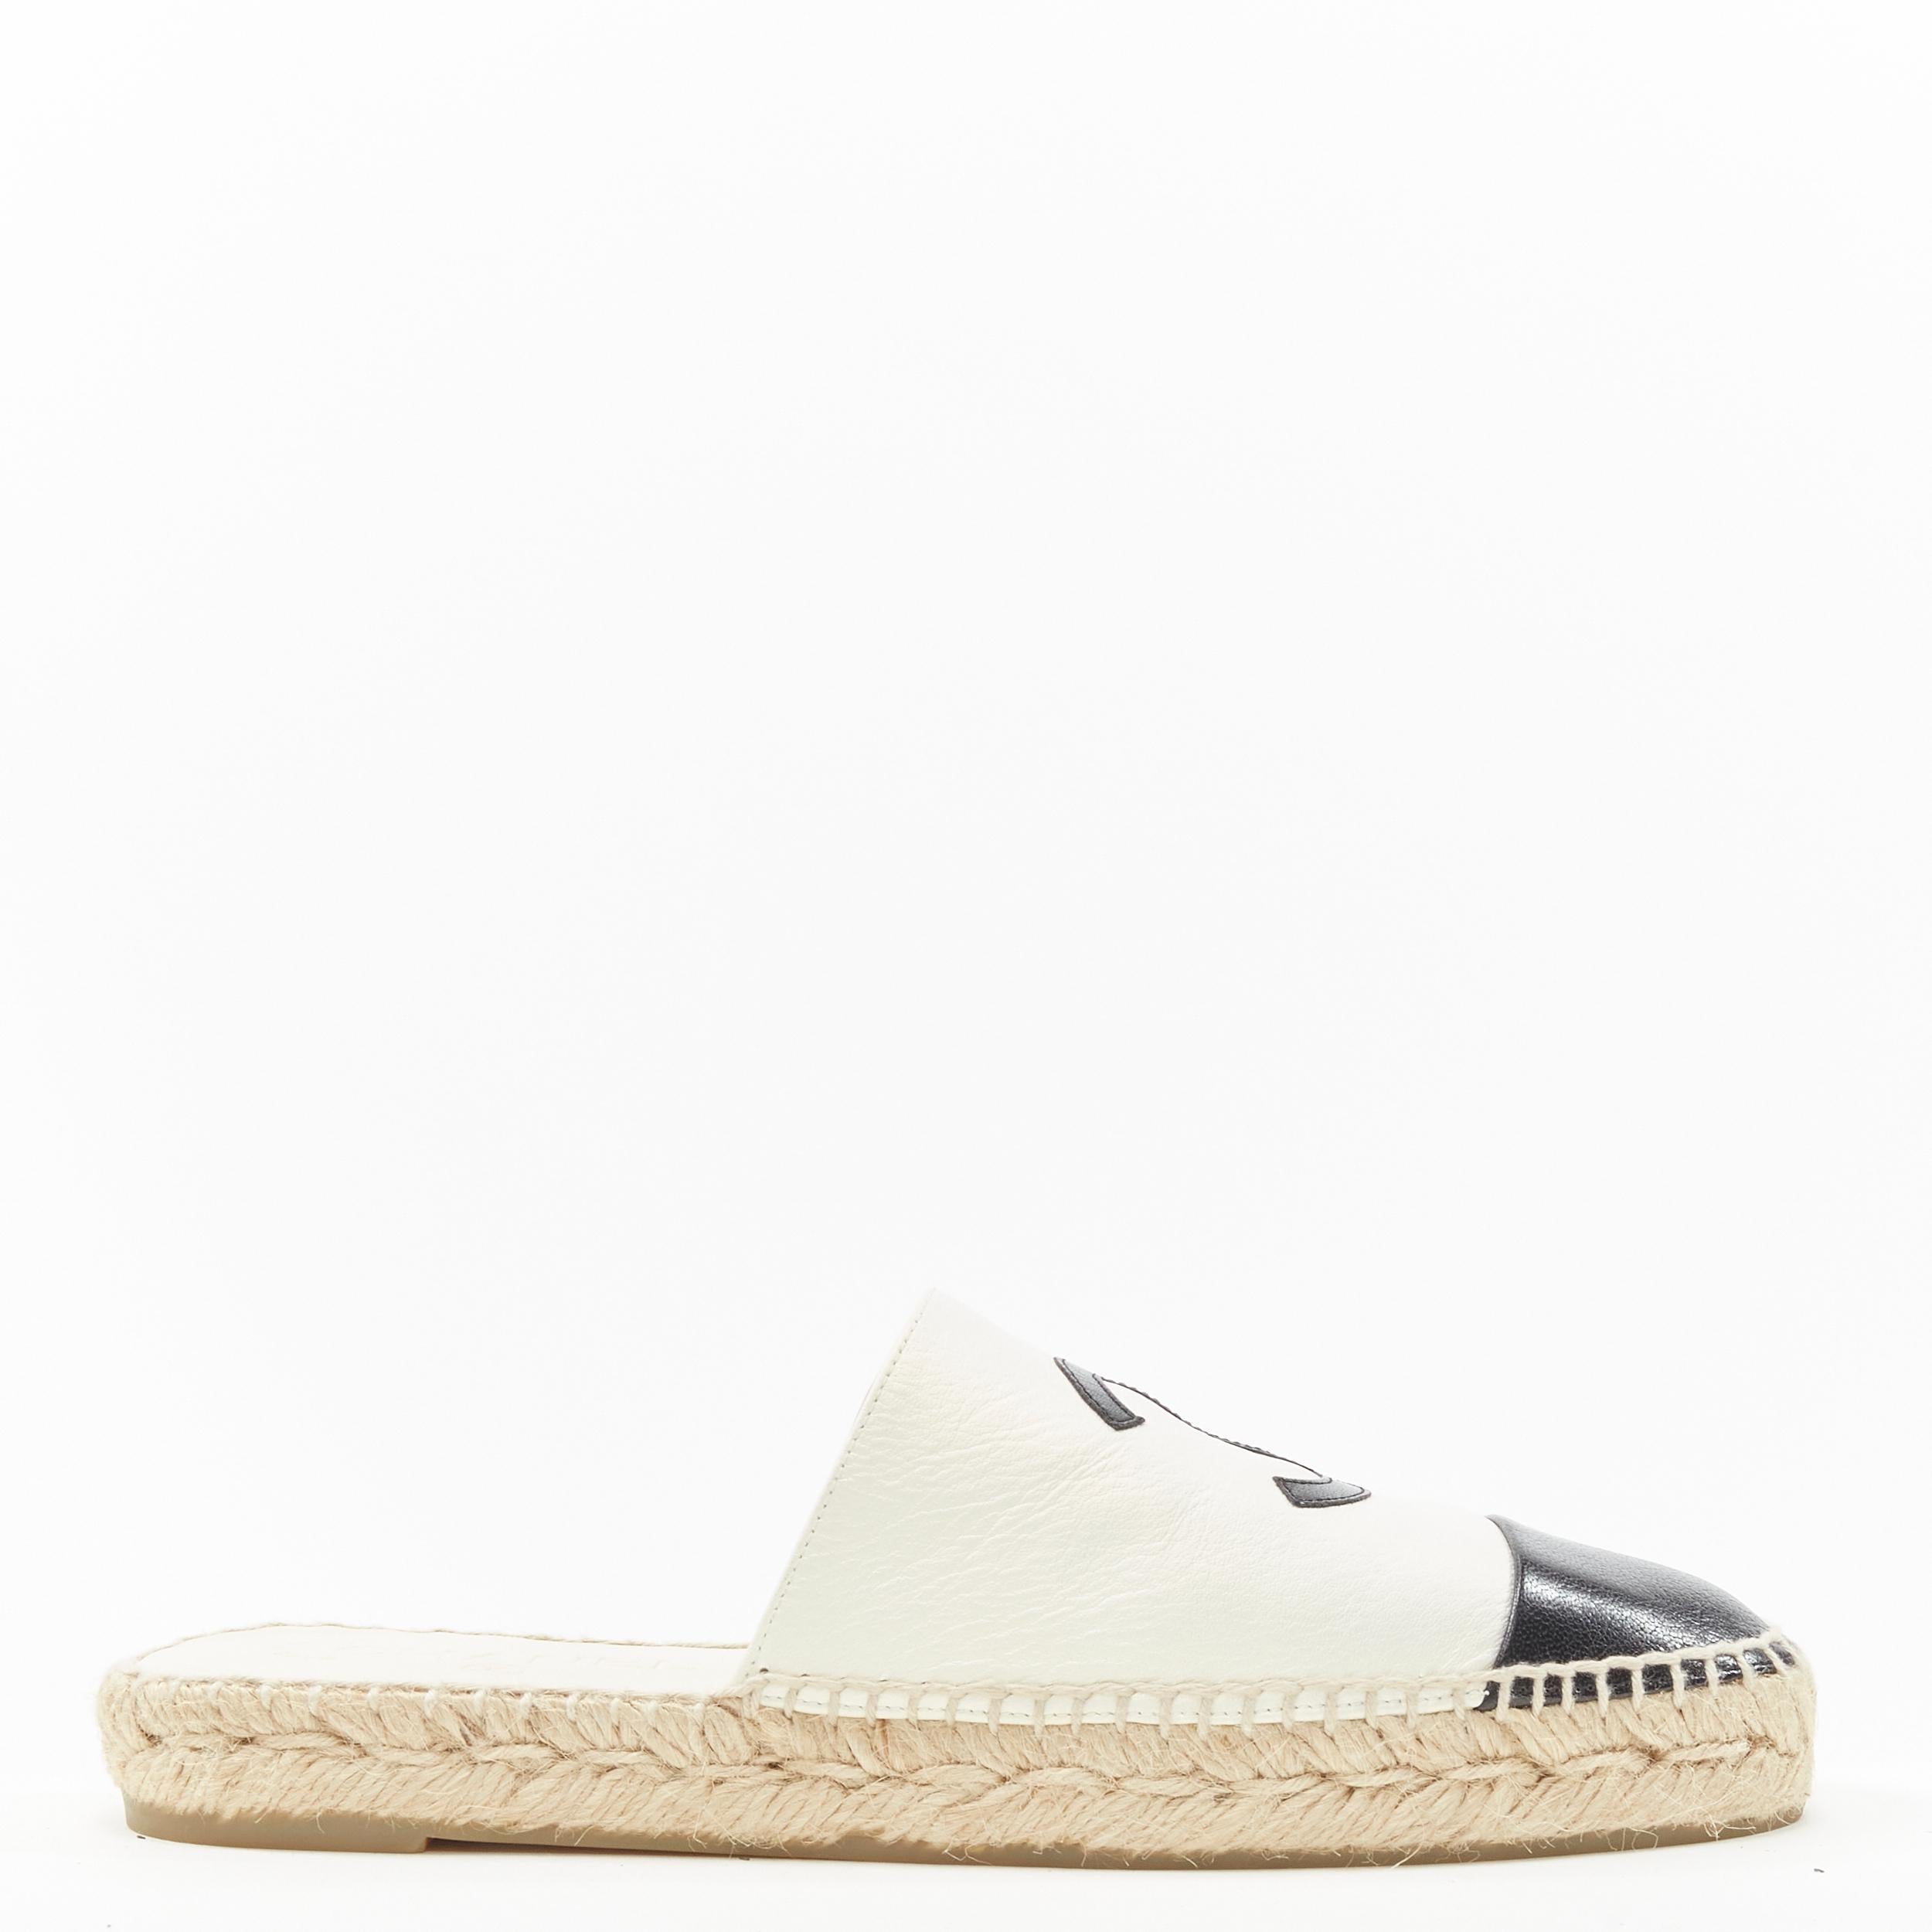 CHANEL pearl sheen white leather black CC toe cap espadrille jute sole mule EU38 Reference: LNKO/A01897 
Brand: Chanel 
Material: Leather 
Color: White 
Pattern: Solid 
Extra Detail: BG33553. Pearlescent iridescent white leather. Black GG logo and